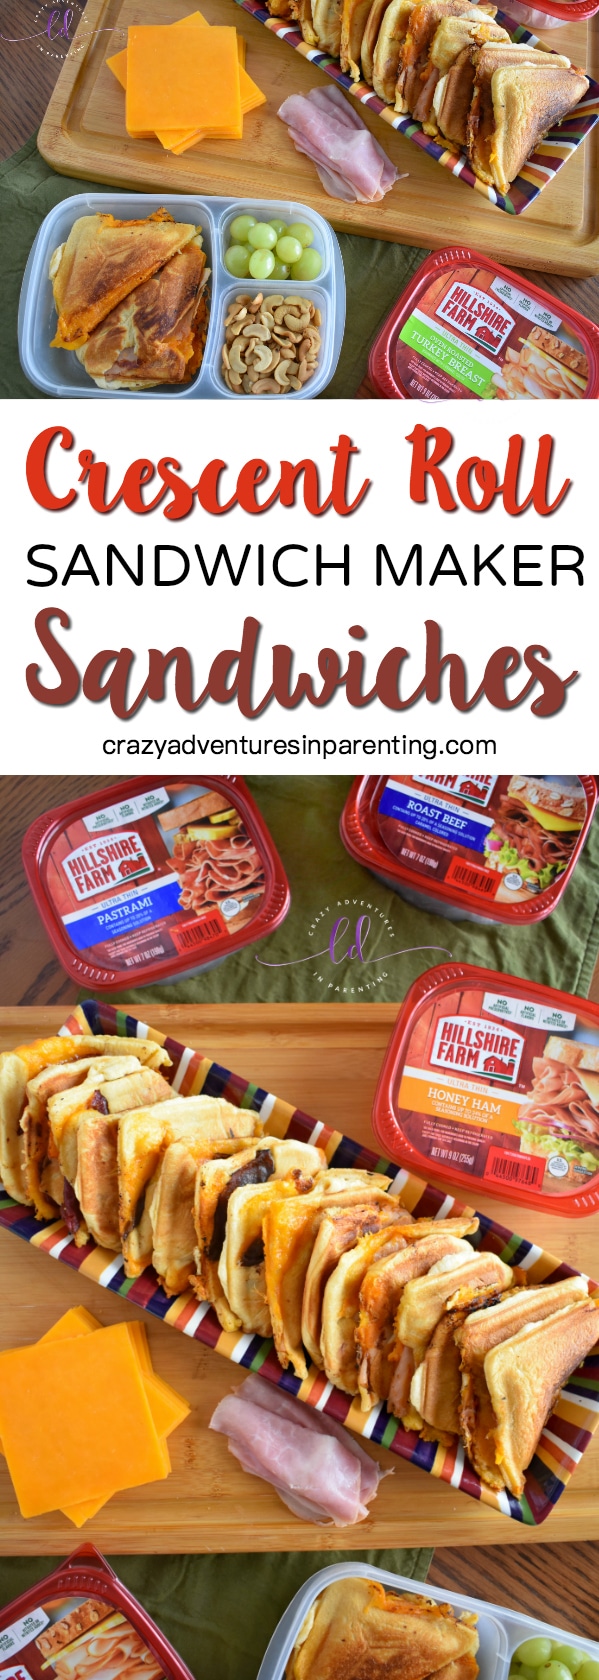 How to Make Crescent Roll Sandwich Maker Sandwiches